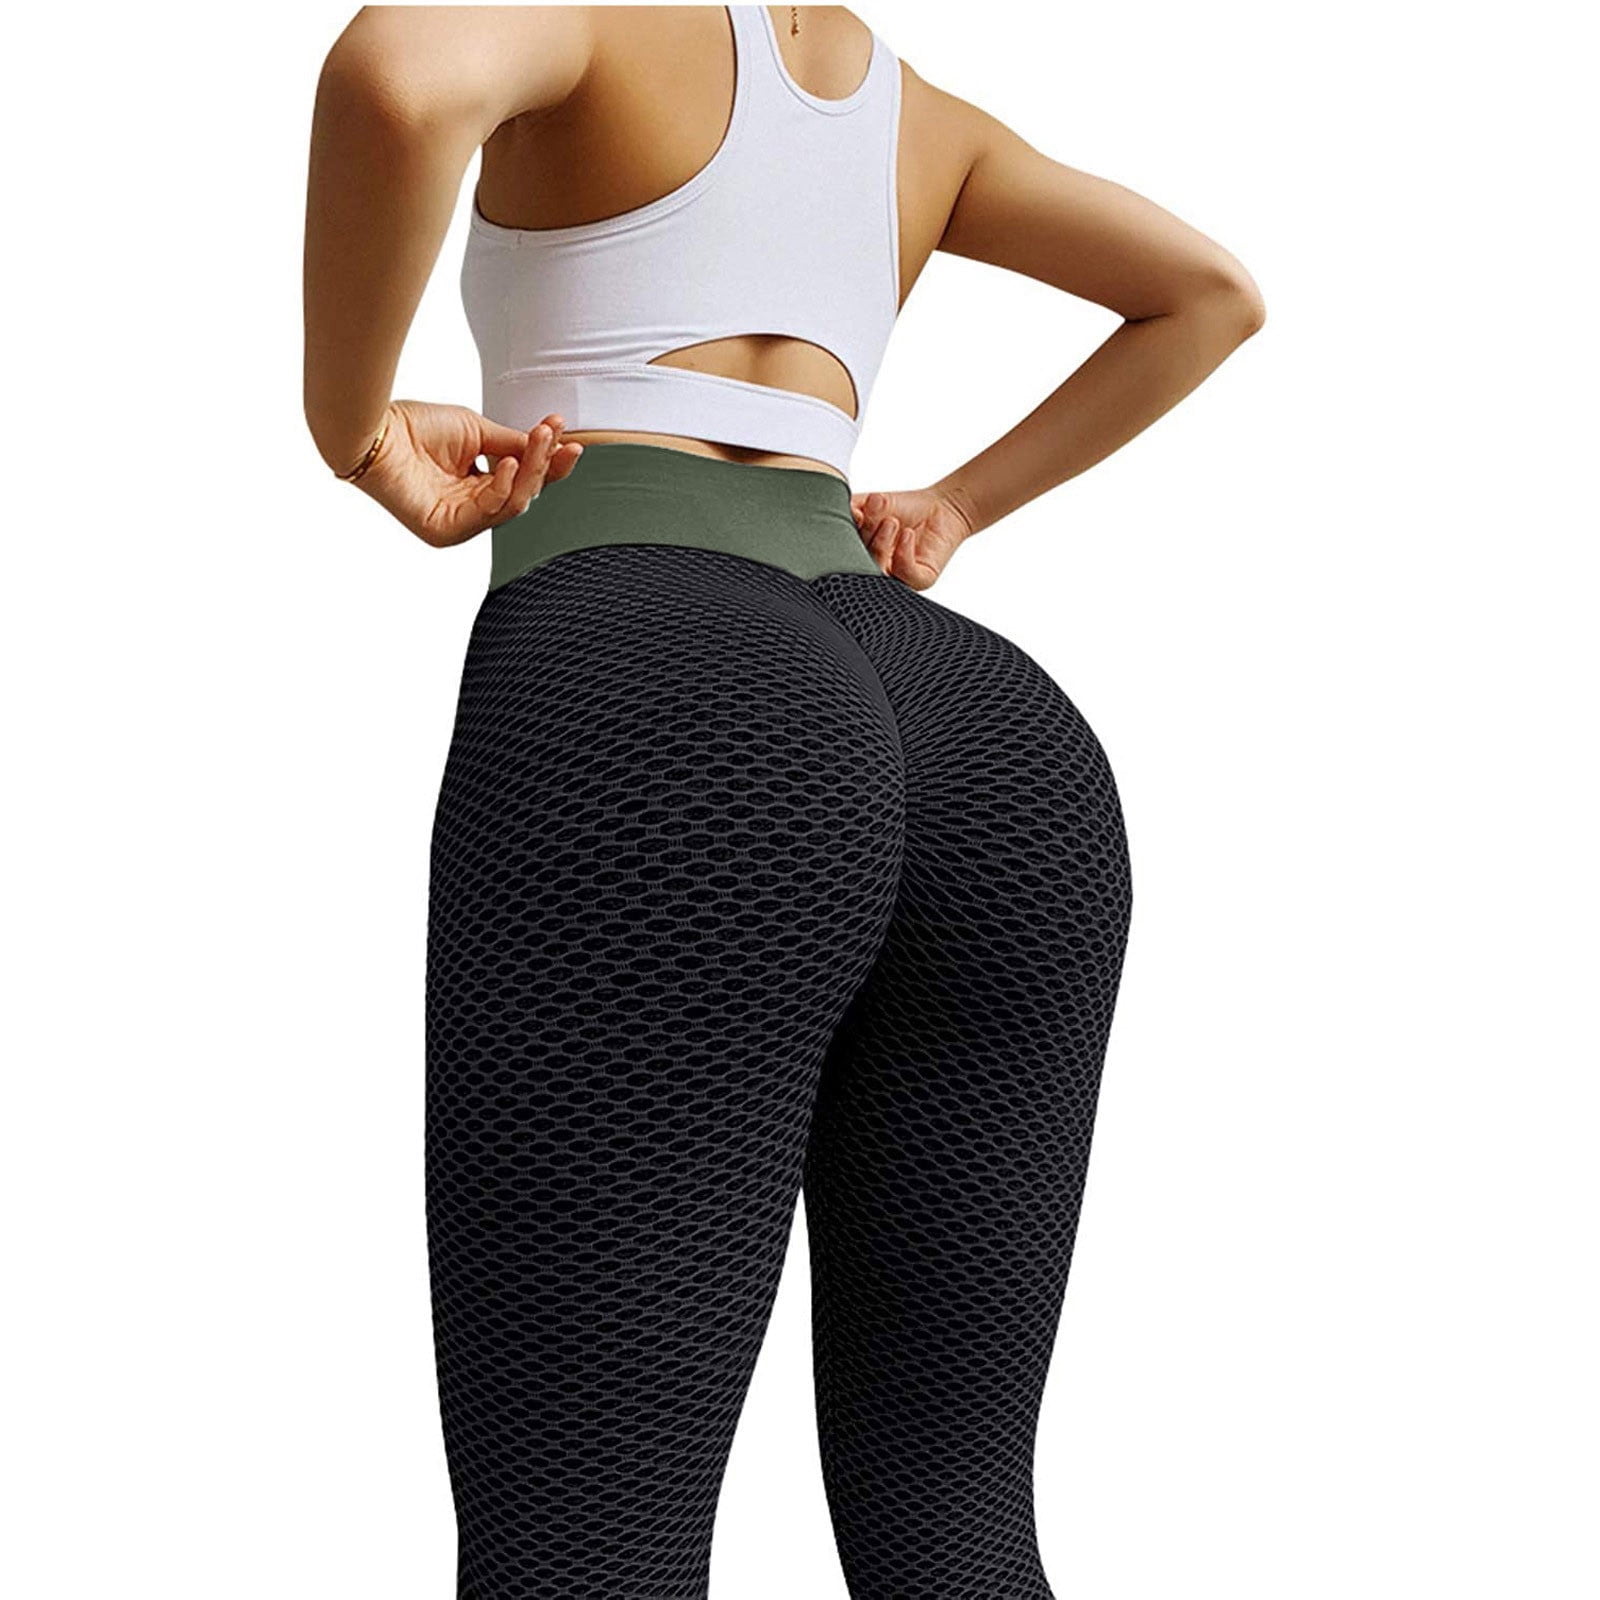  Vertical Striped Leggings for Women Black and White 7/8 High  Waist Workout Legging Lined Yellow Sweatpants Active Slim Fit Yoga Pants  Stretchy Ankle Length Running Compression Black+White Small : Clothing,  Shoes